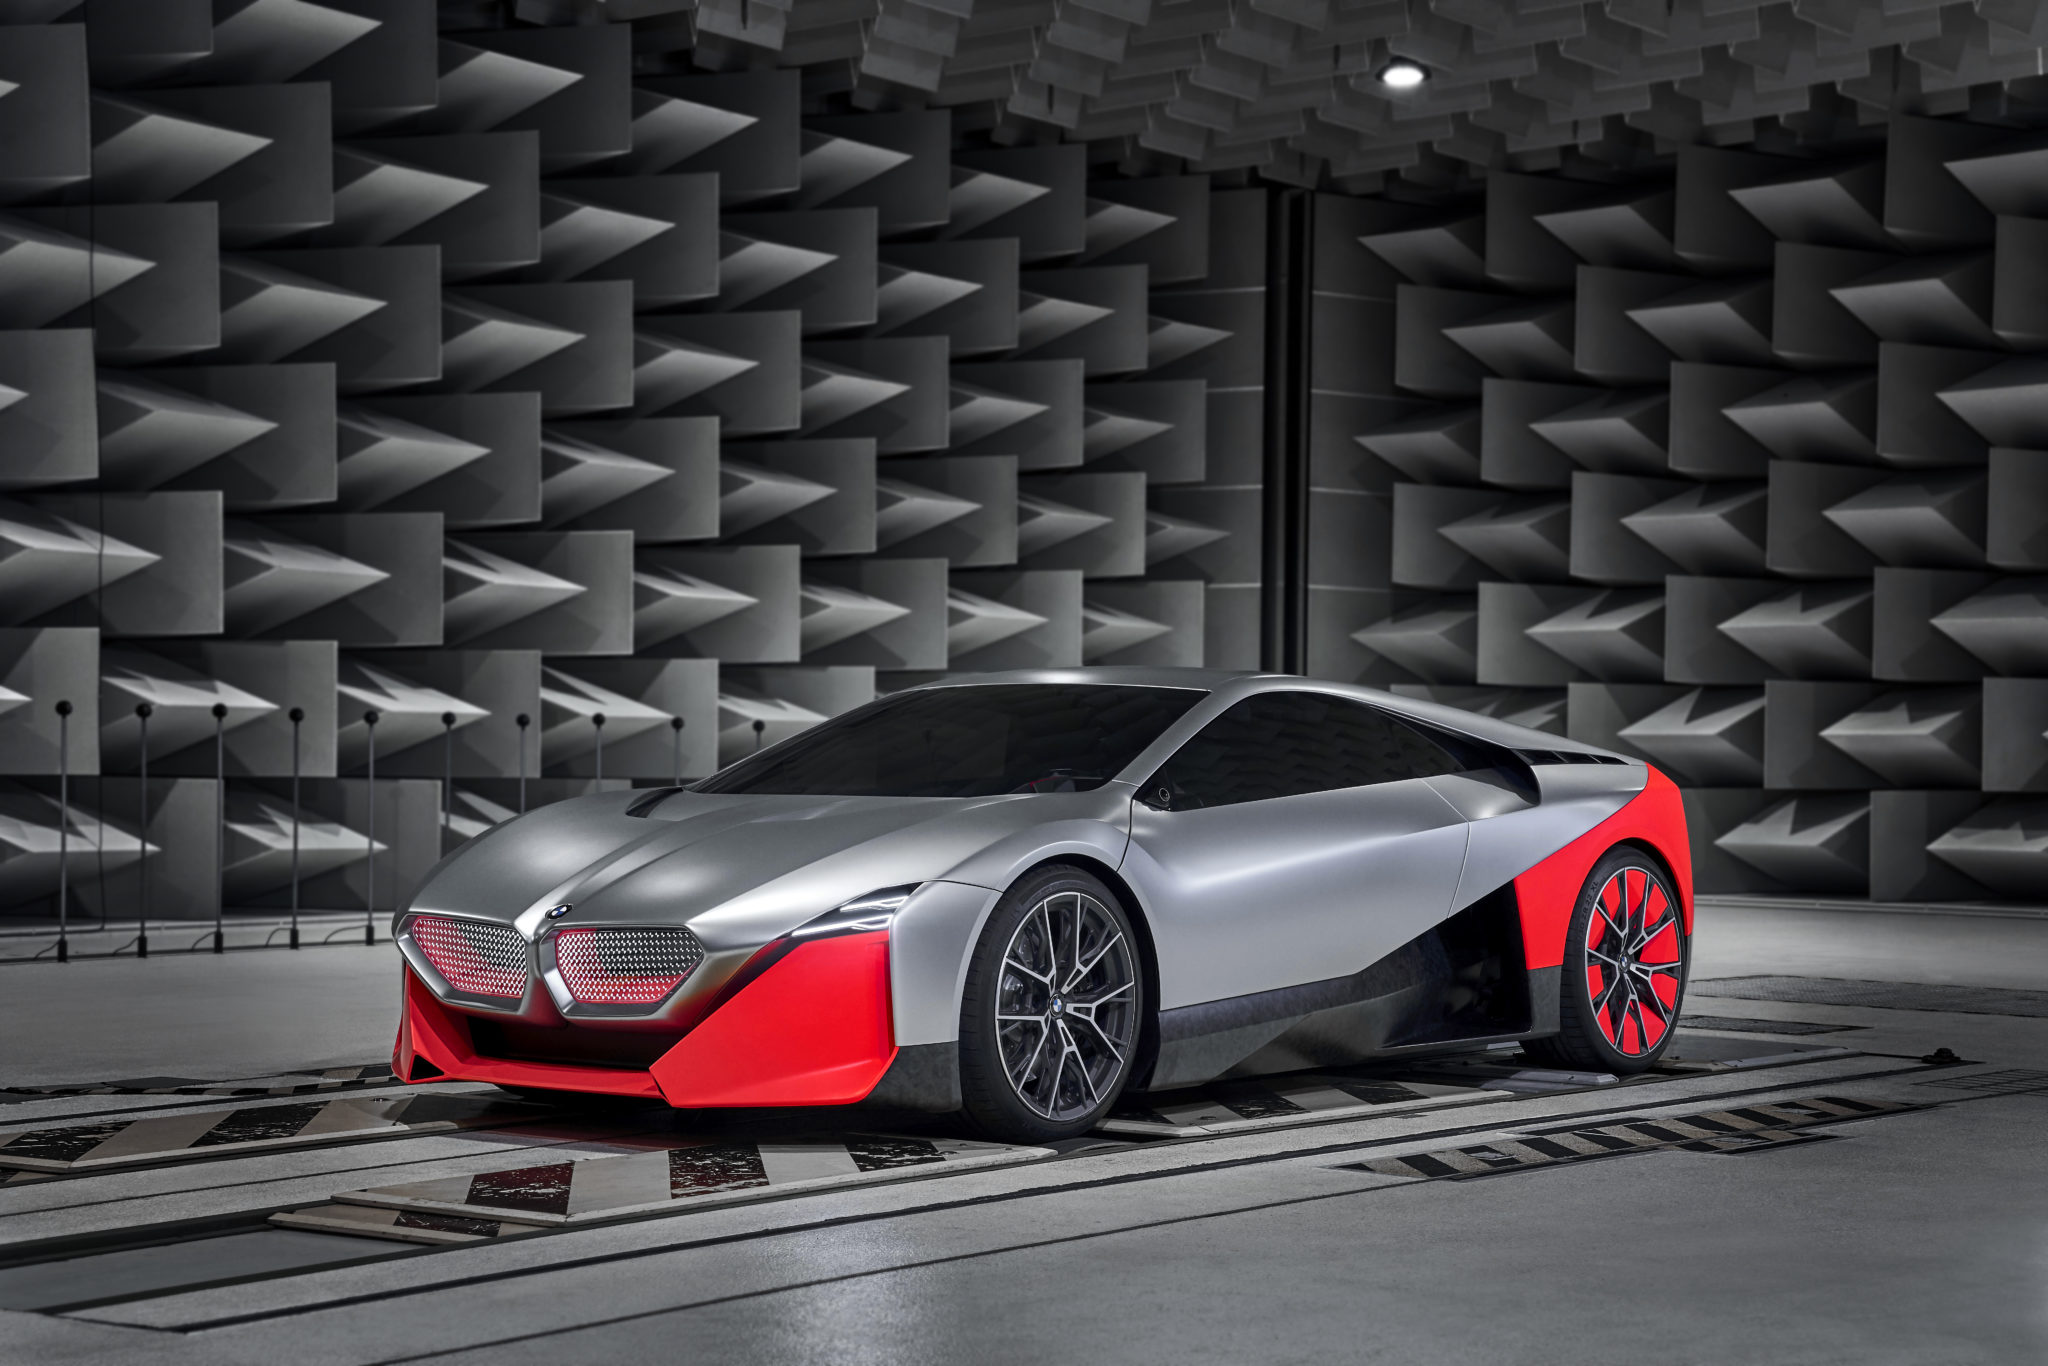 Zimmer composes sound for electric BMWs